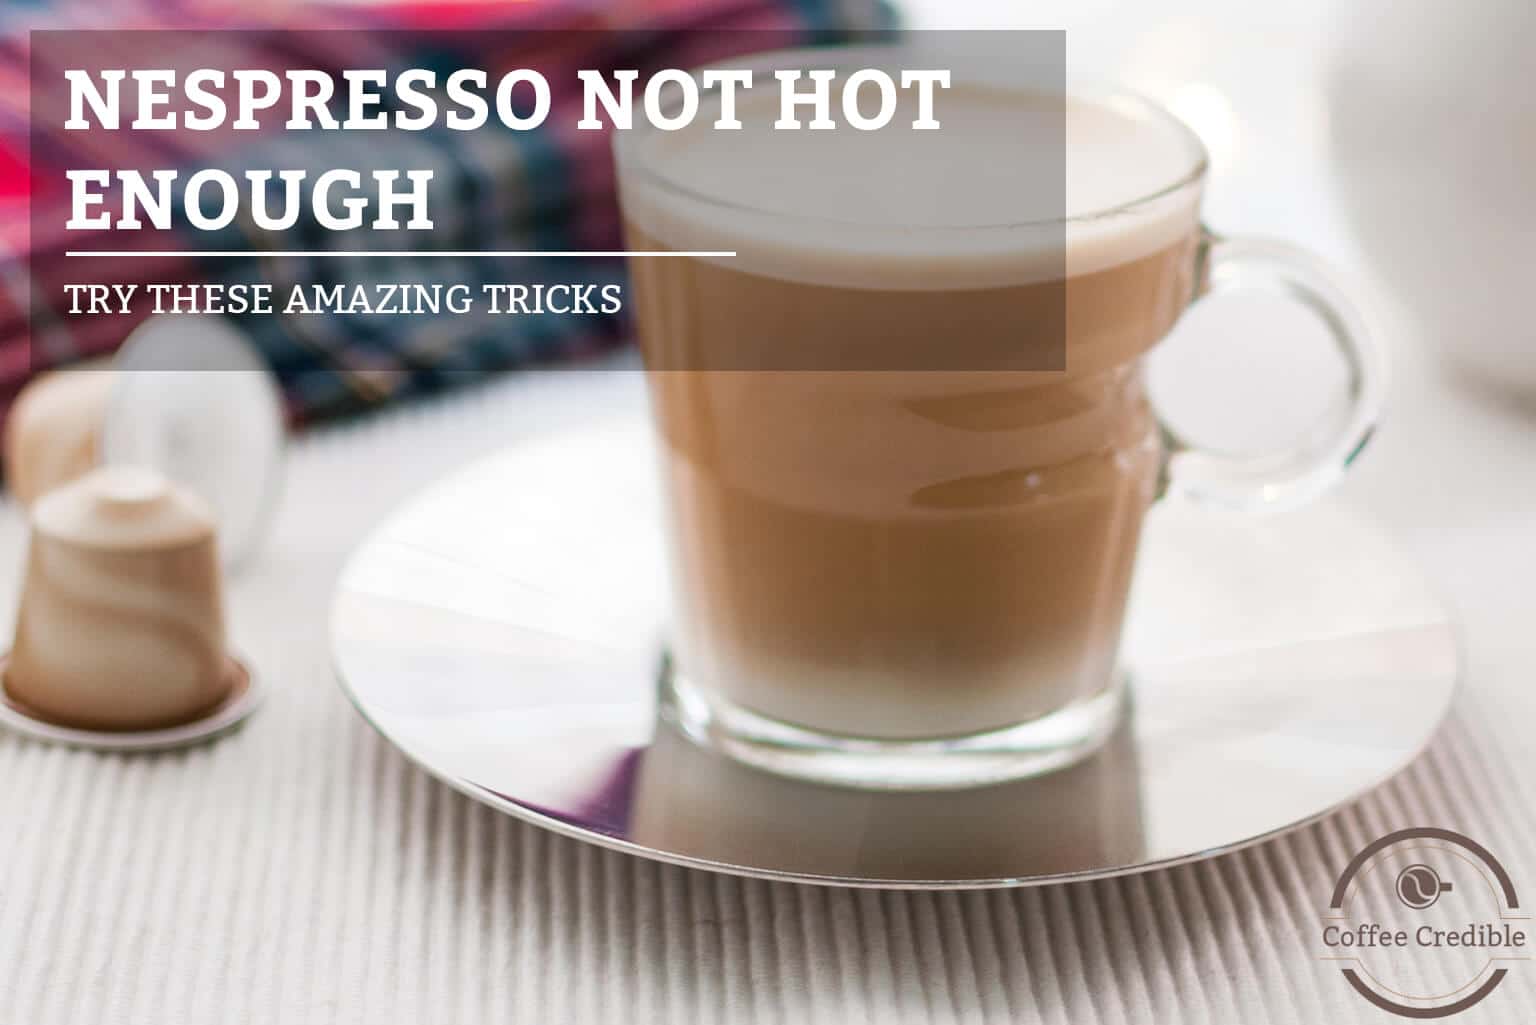 Is Your Nespresso Not Hot Enough? [Try These Amazing Tricks]